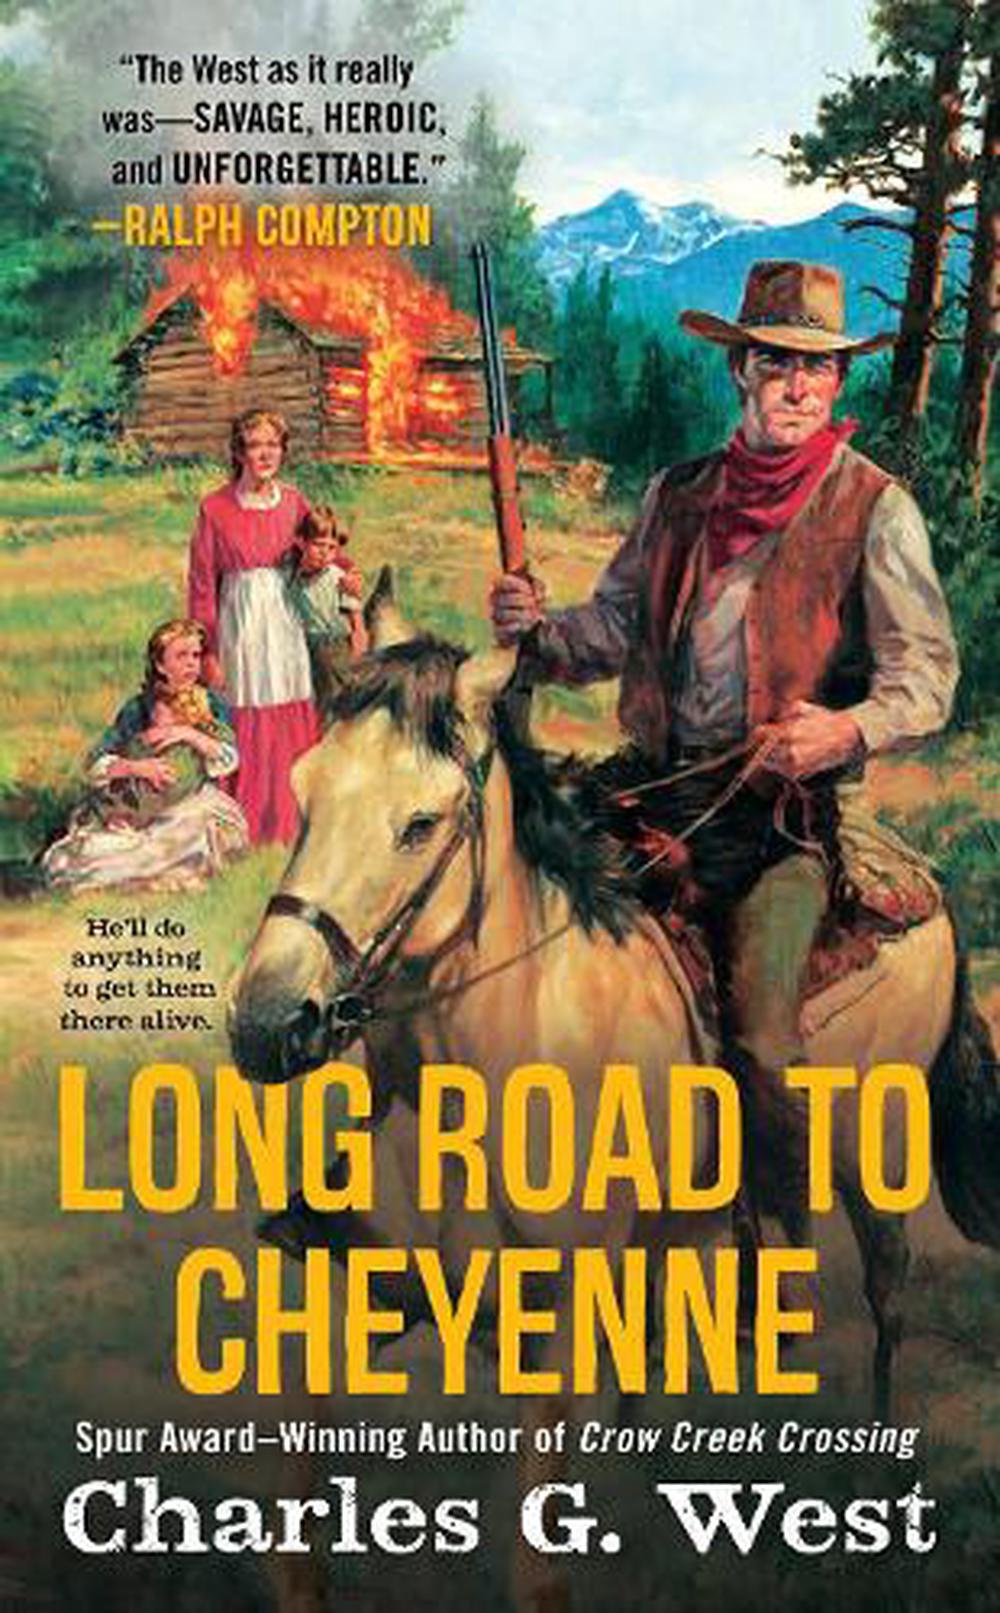 Long Road to Cheyenne by Charles G. West (English) Mass Market